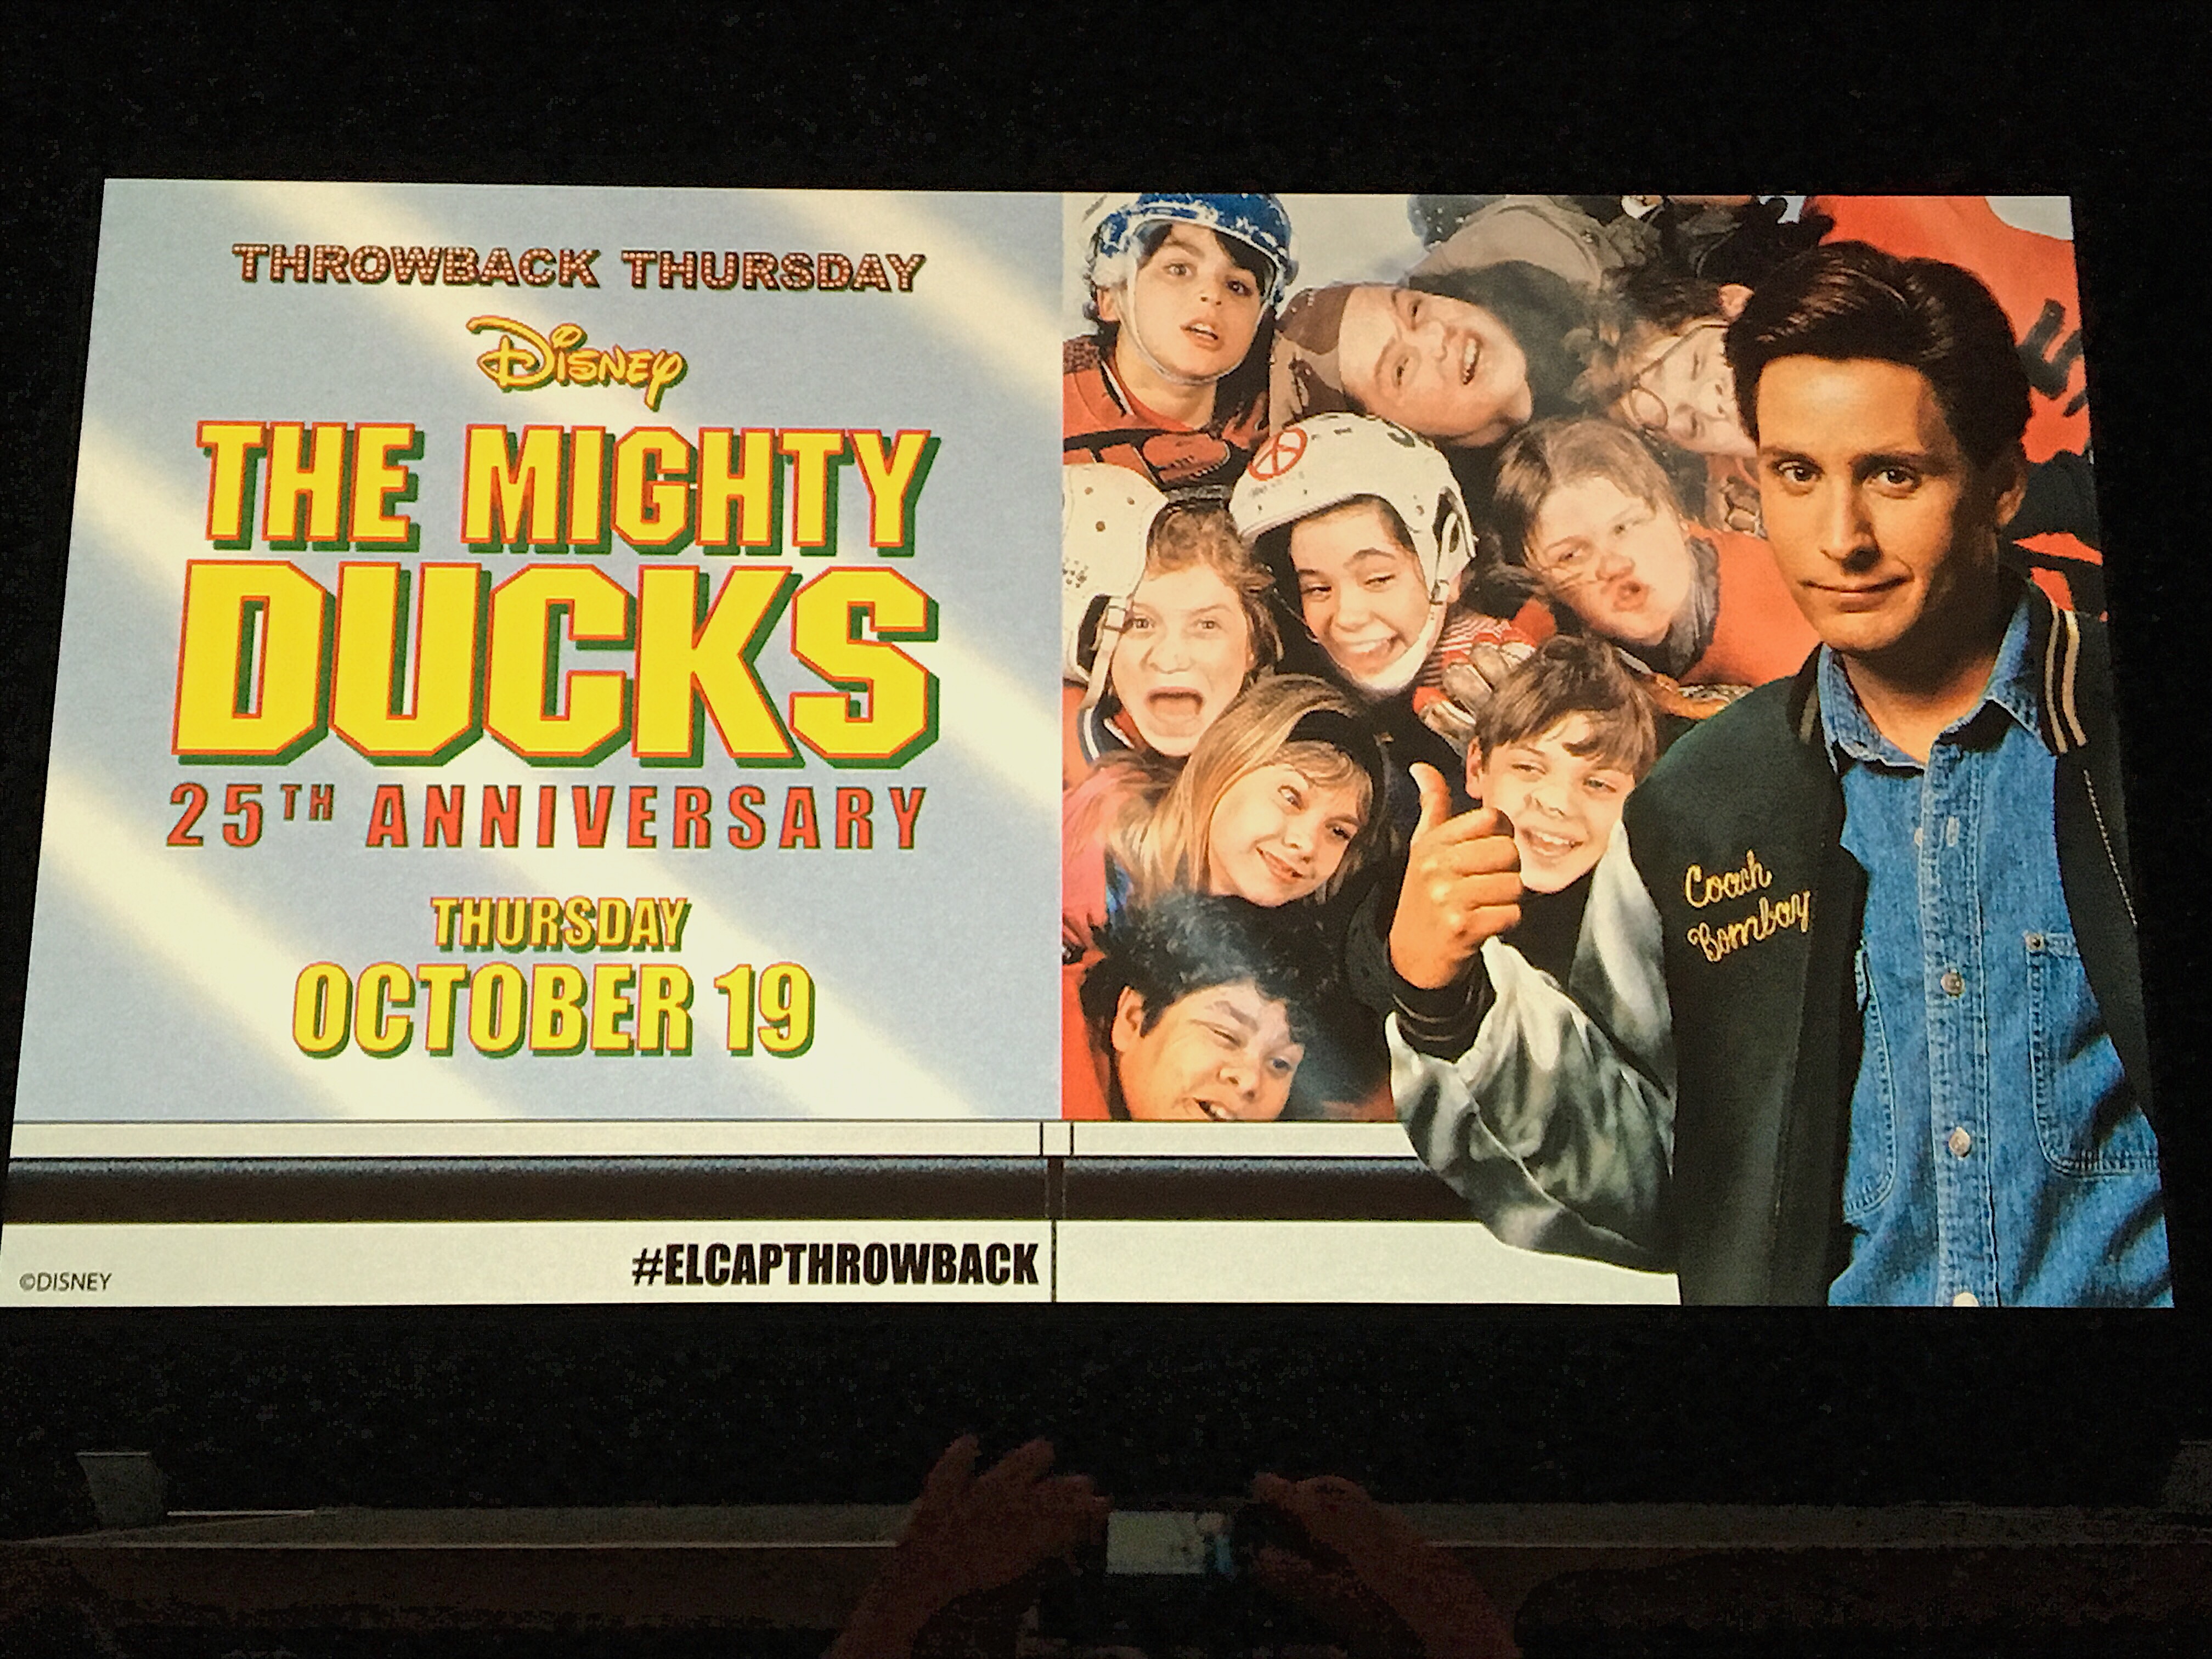 The Mighty Ducks is revealed as the next Throwback Thursday event. 